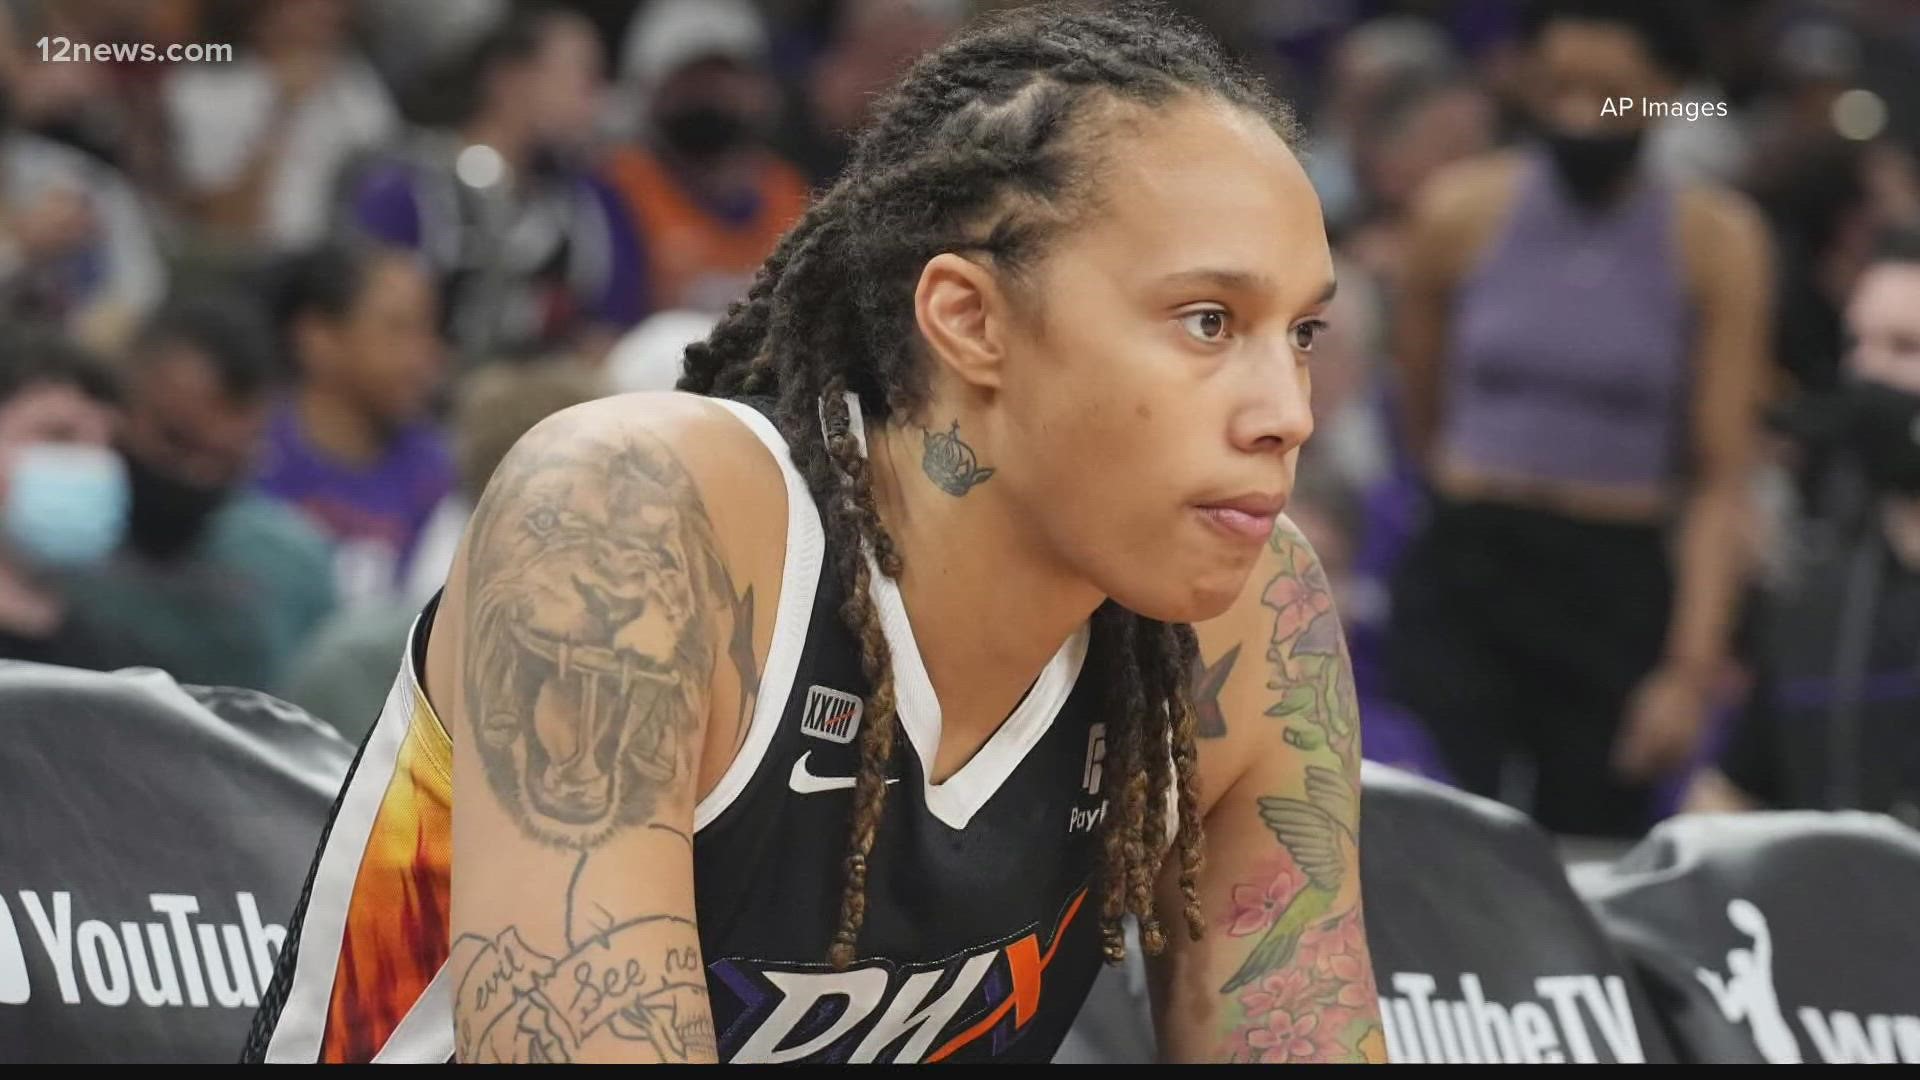 A Russian city court ruled to detain Griner for at least two more months, a recent report revealed.